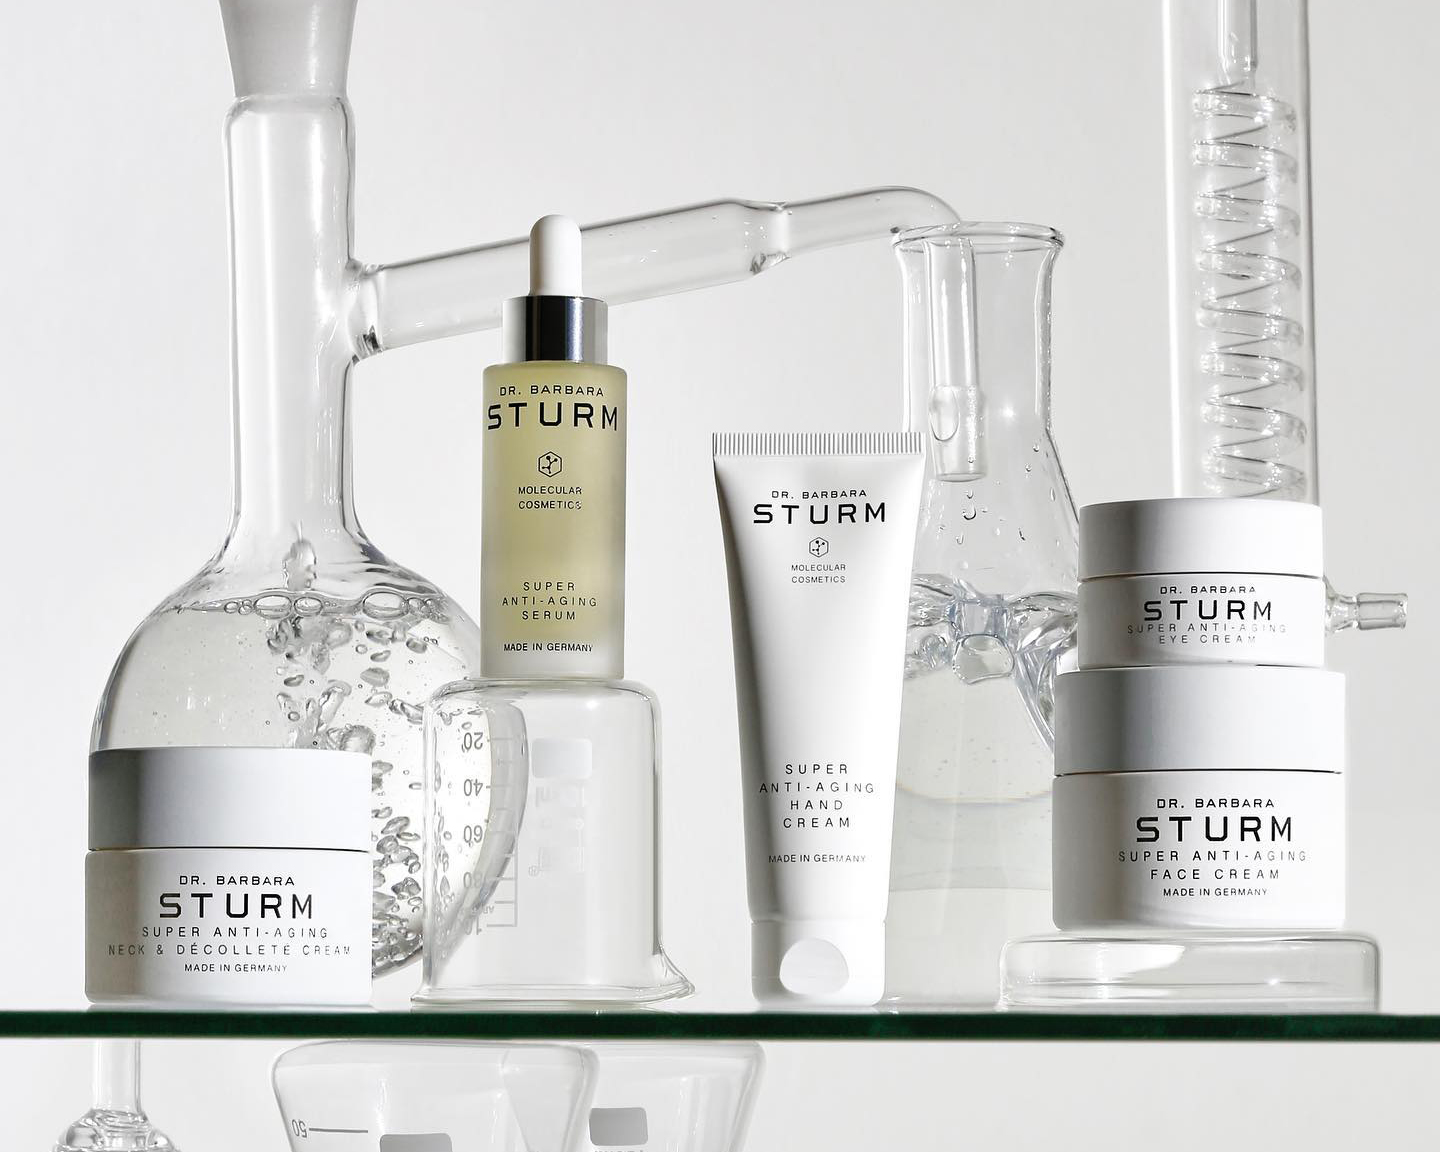 Dr Barbara Sturm's products with bunsen beakers in the background.